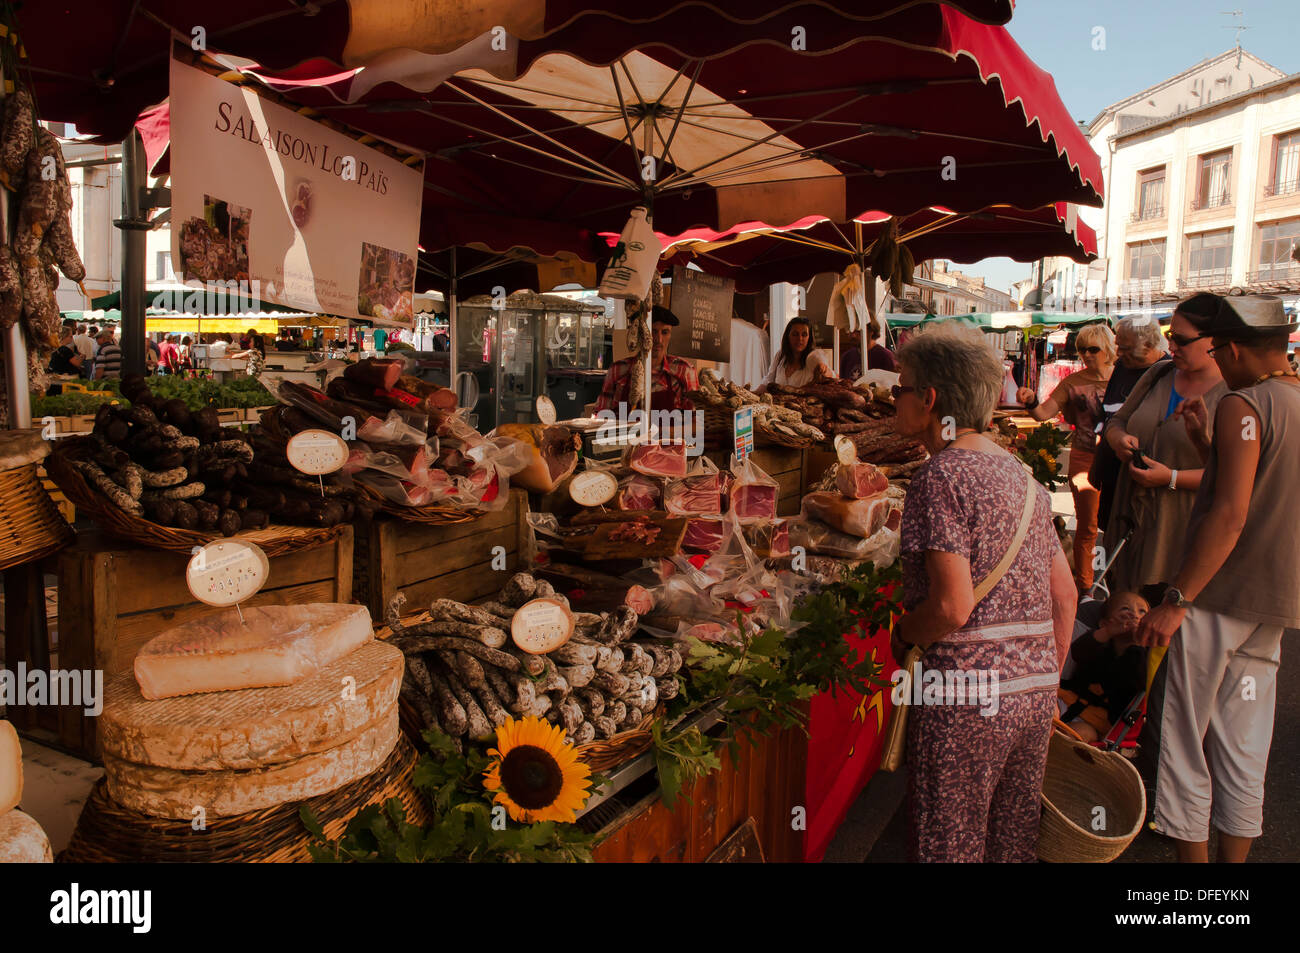 Charcuterie stall with sausage, cold meats and cheeses in abundance in Moissac street market, south west France Stock Photo